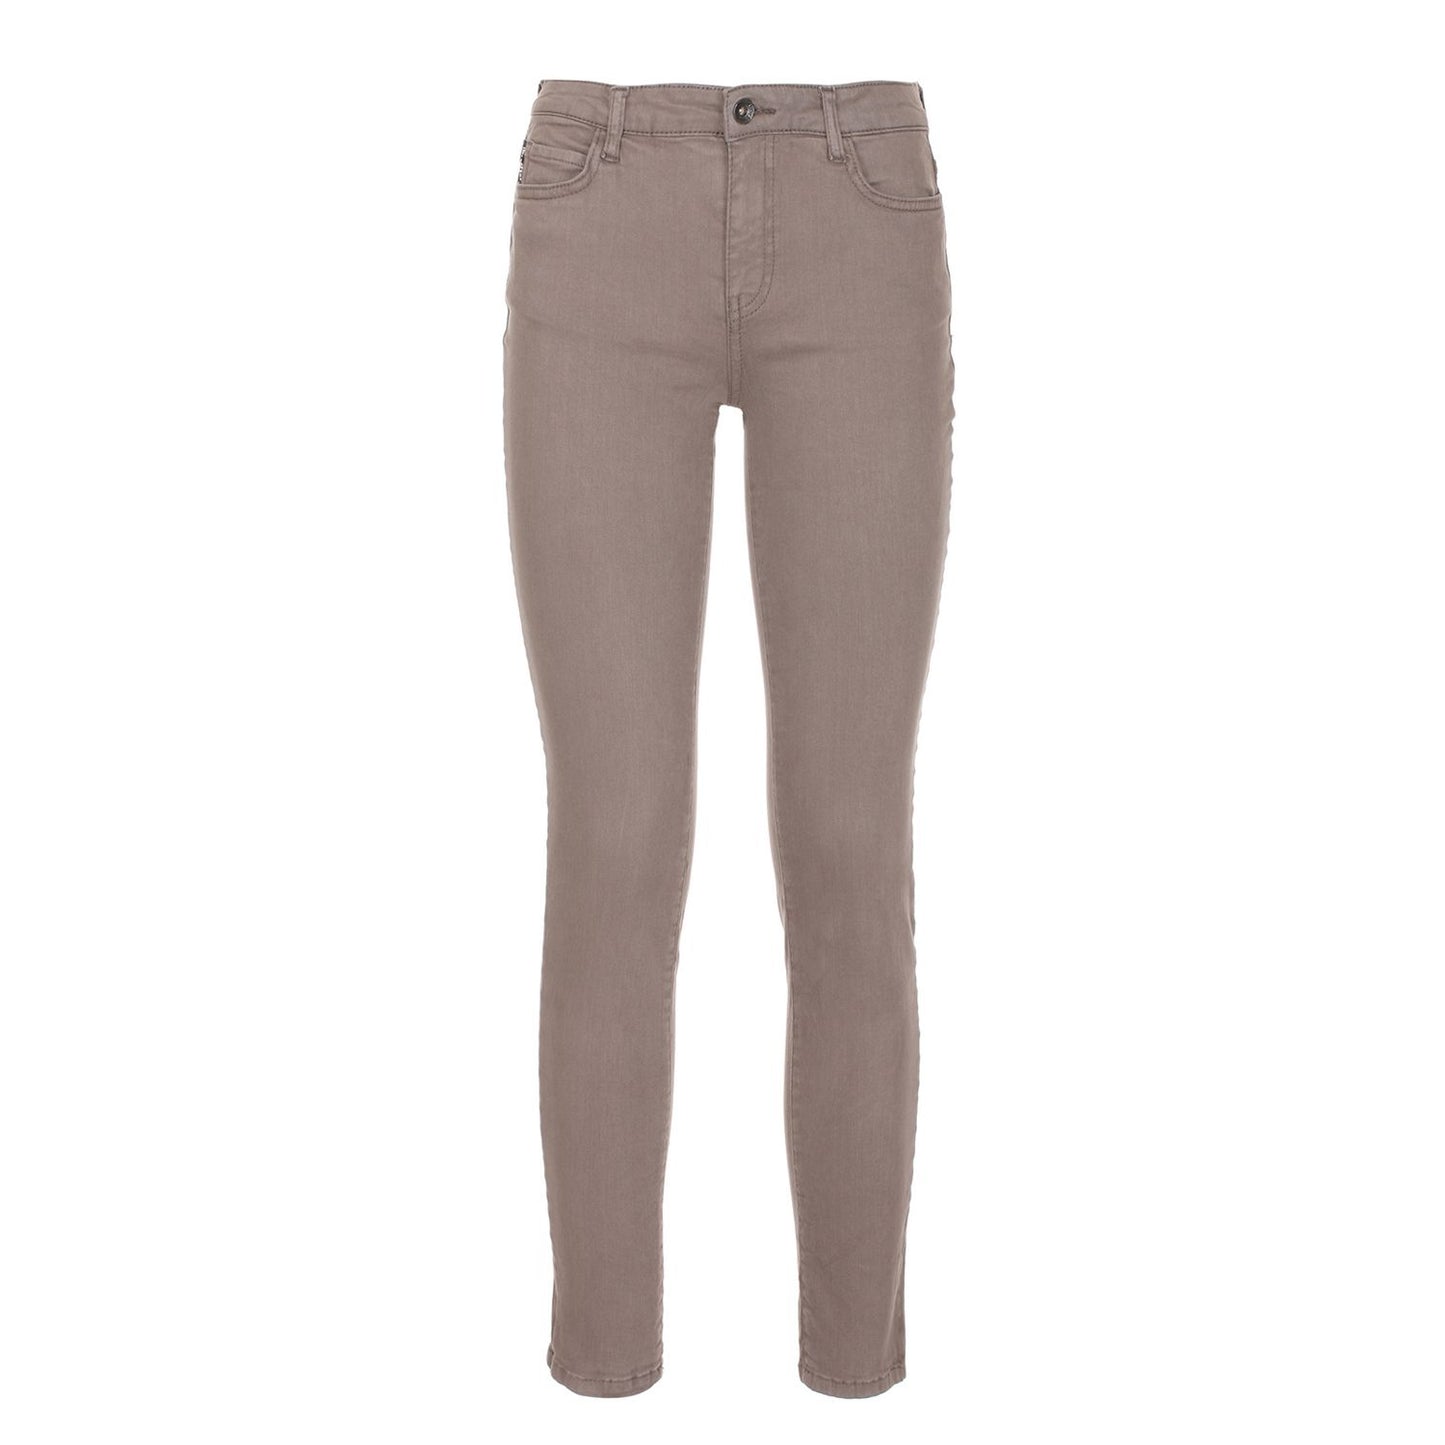 Imperfect Chic Gray Cotton Stretch Pants